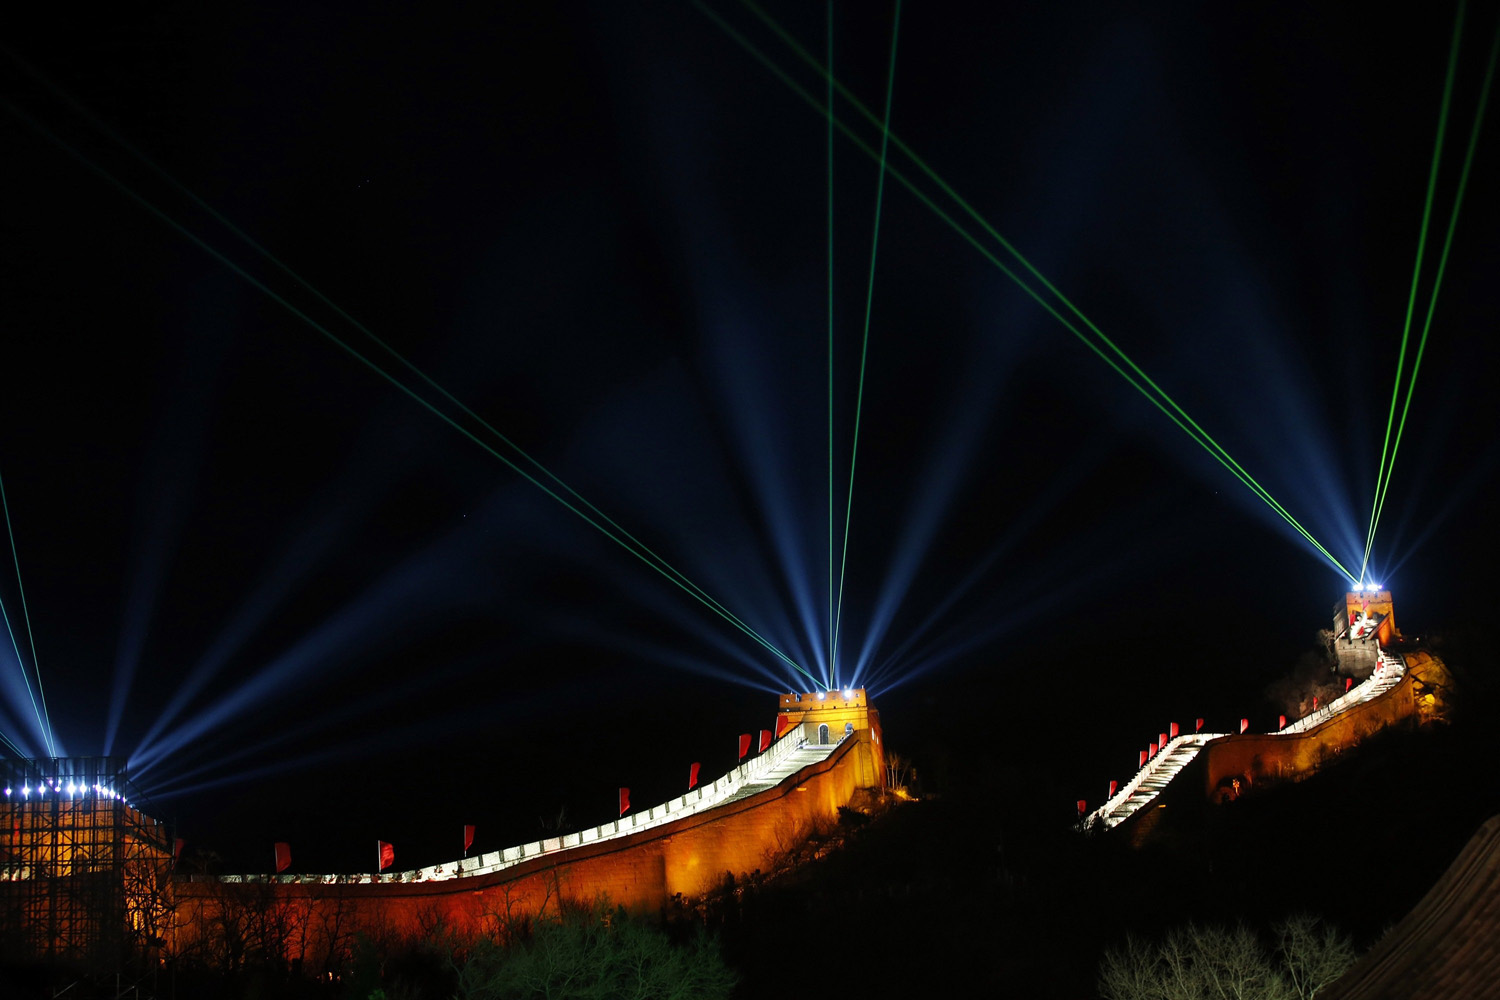 Light and laser illuminate the Great Wall of China to celebrate the new year at the Badaling section of the Great Wall, in Beijing